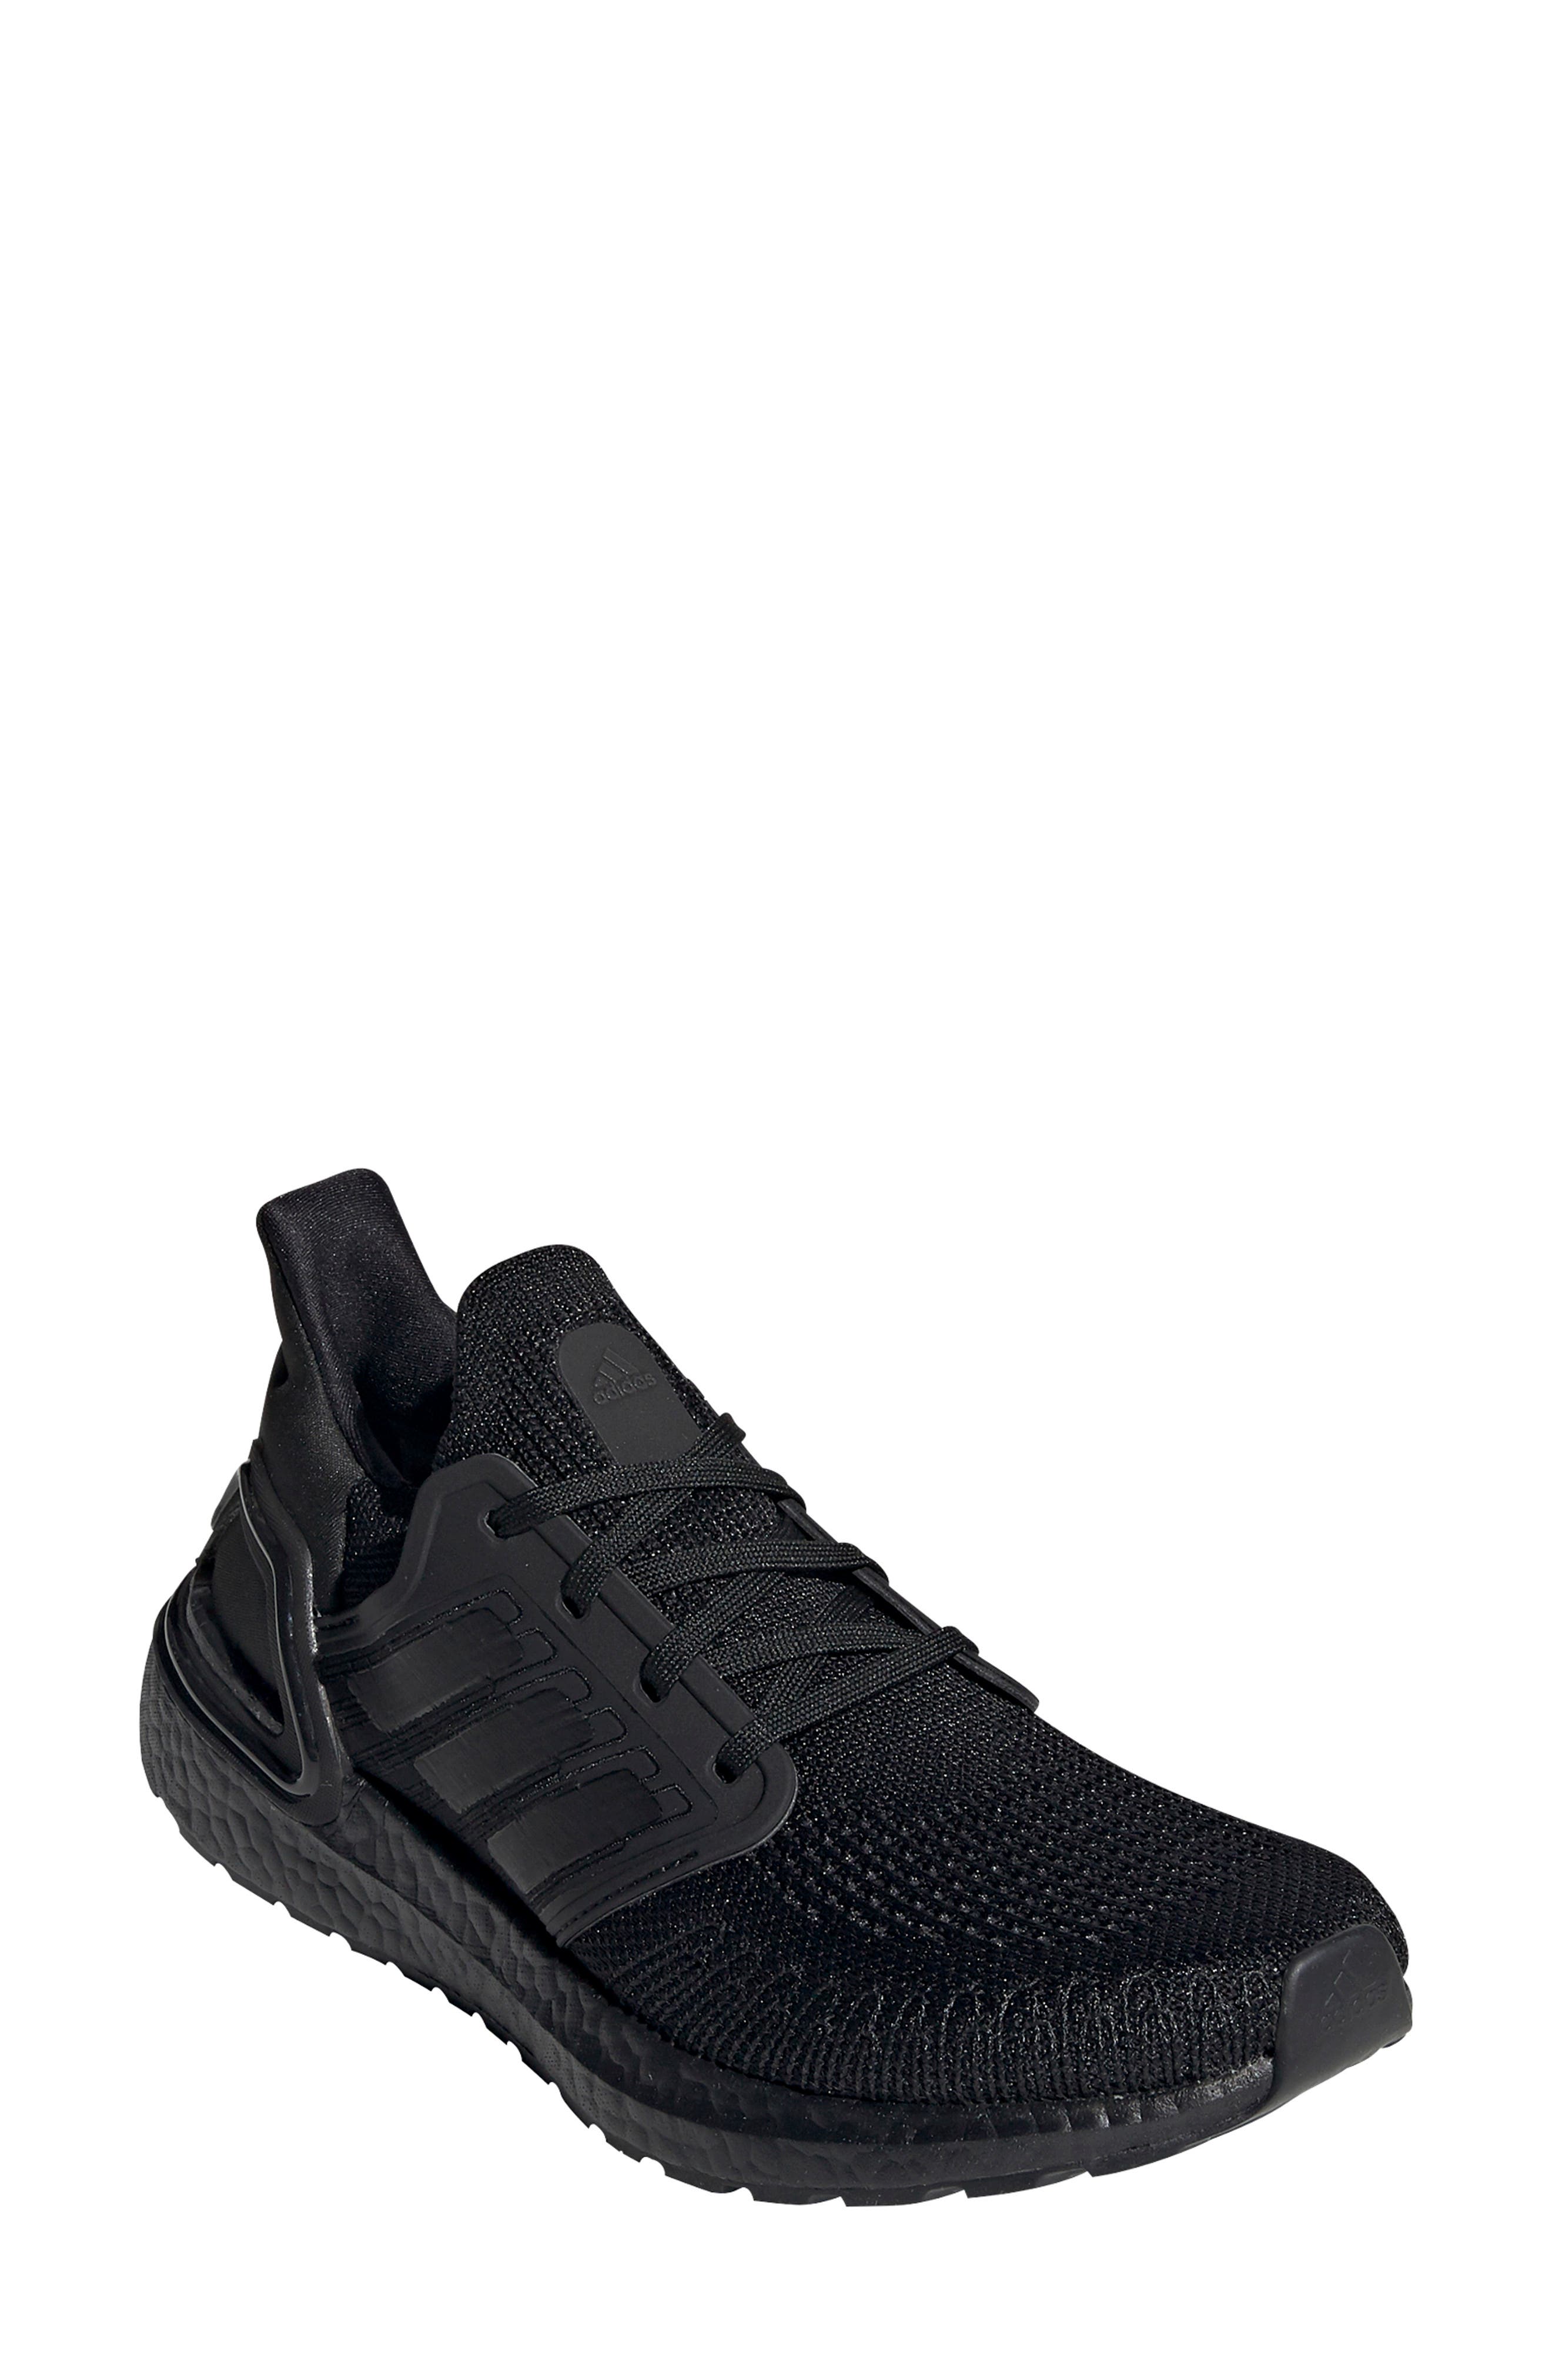 running shoes black buy clothes shoes 